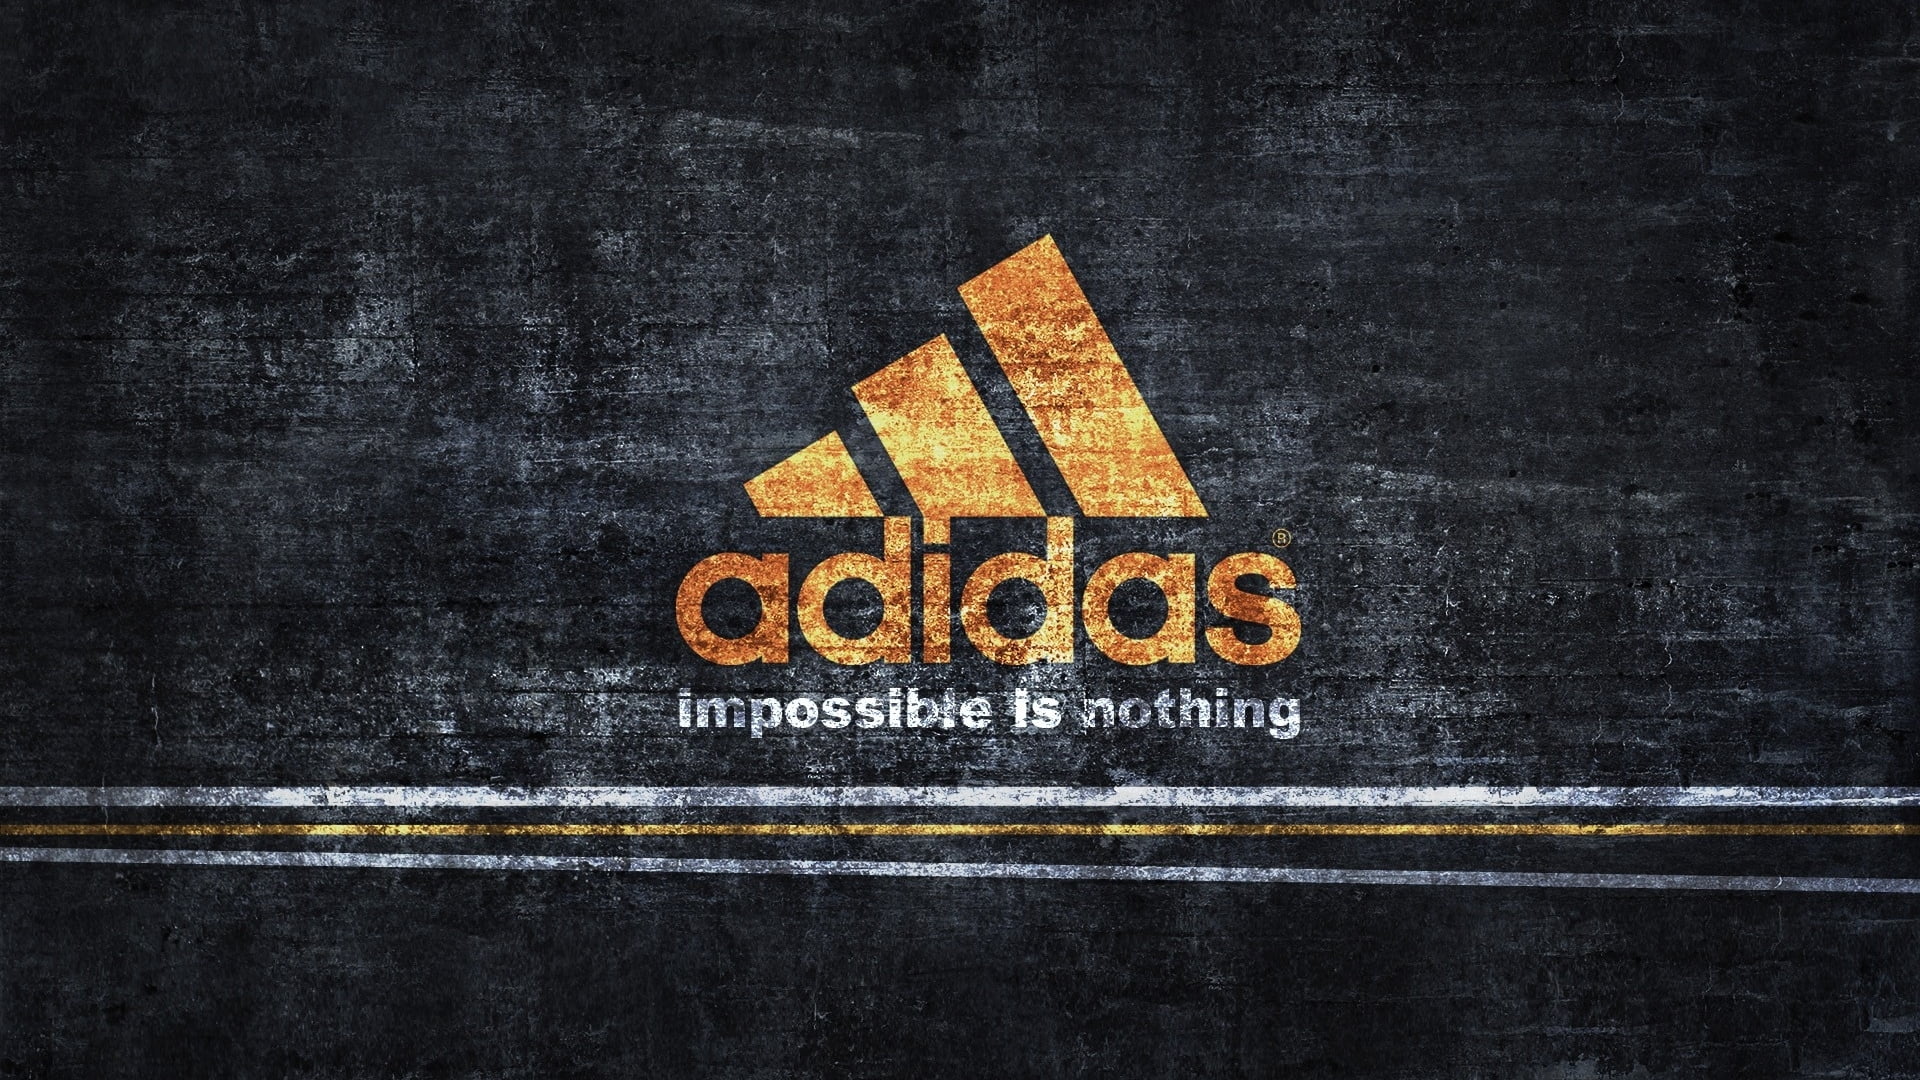 Adidas impossible is nothing text illustration HD wallpaper | Wallpaper  Flare